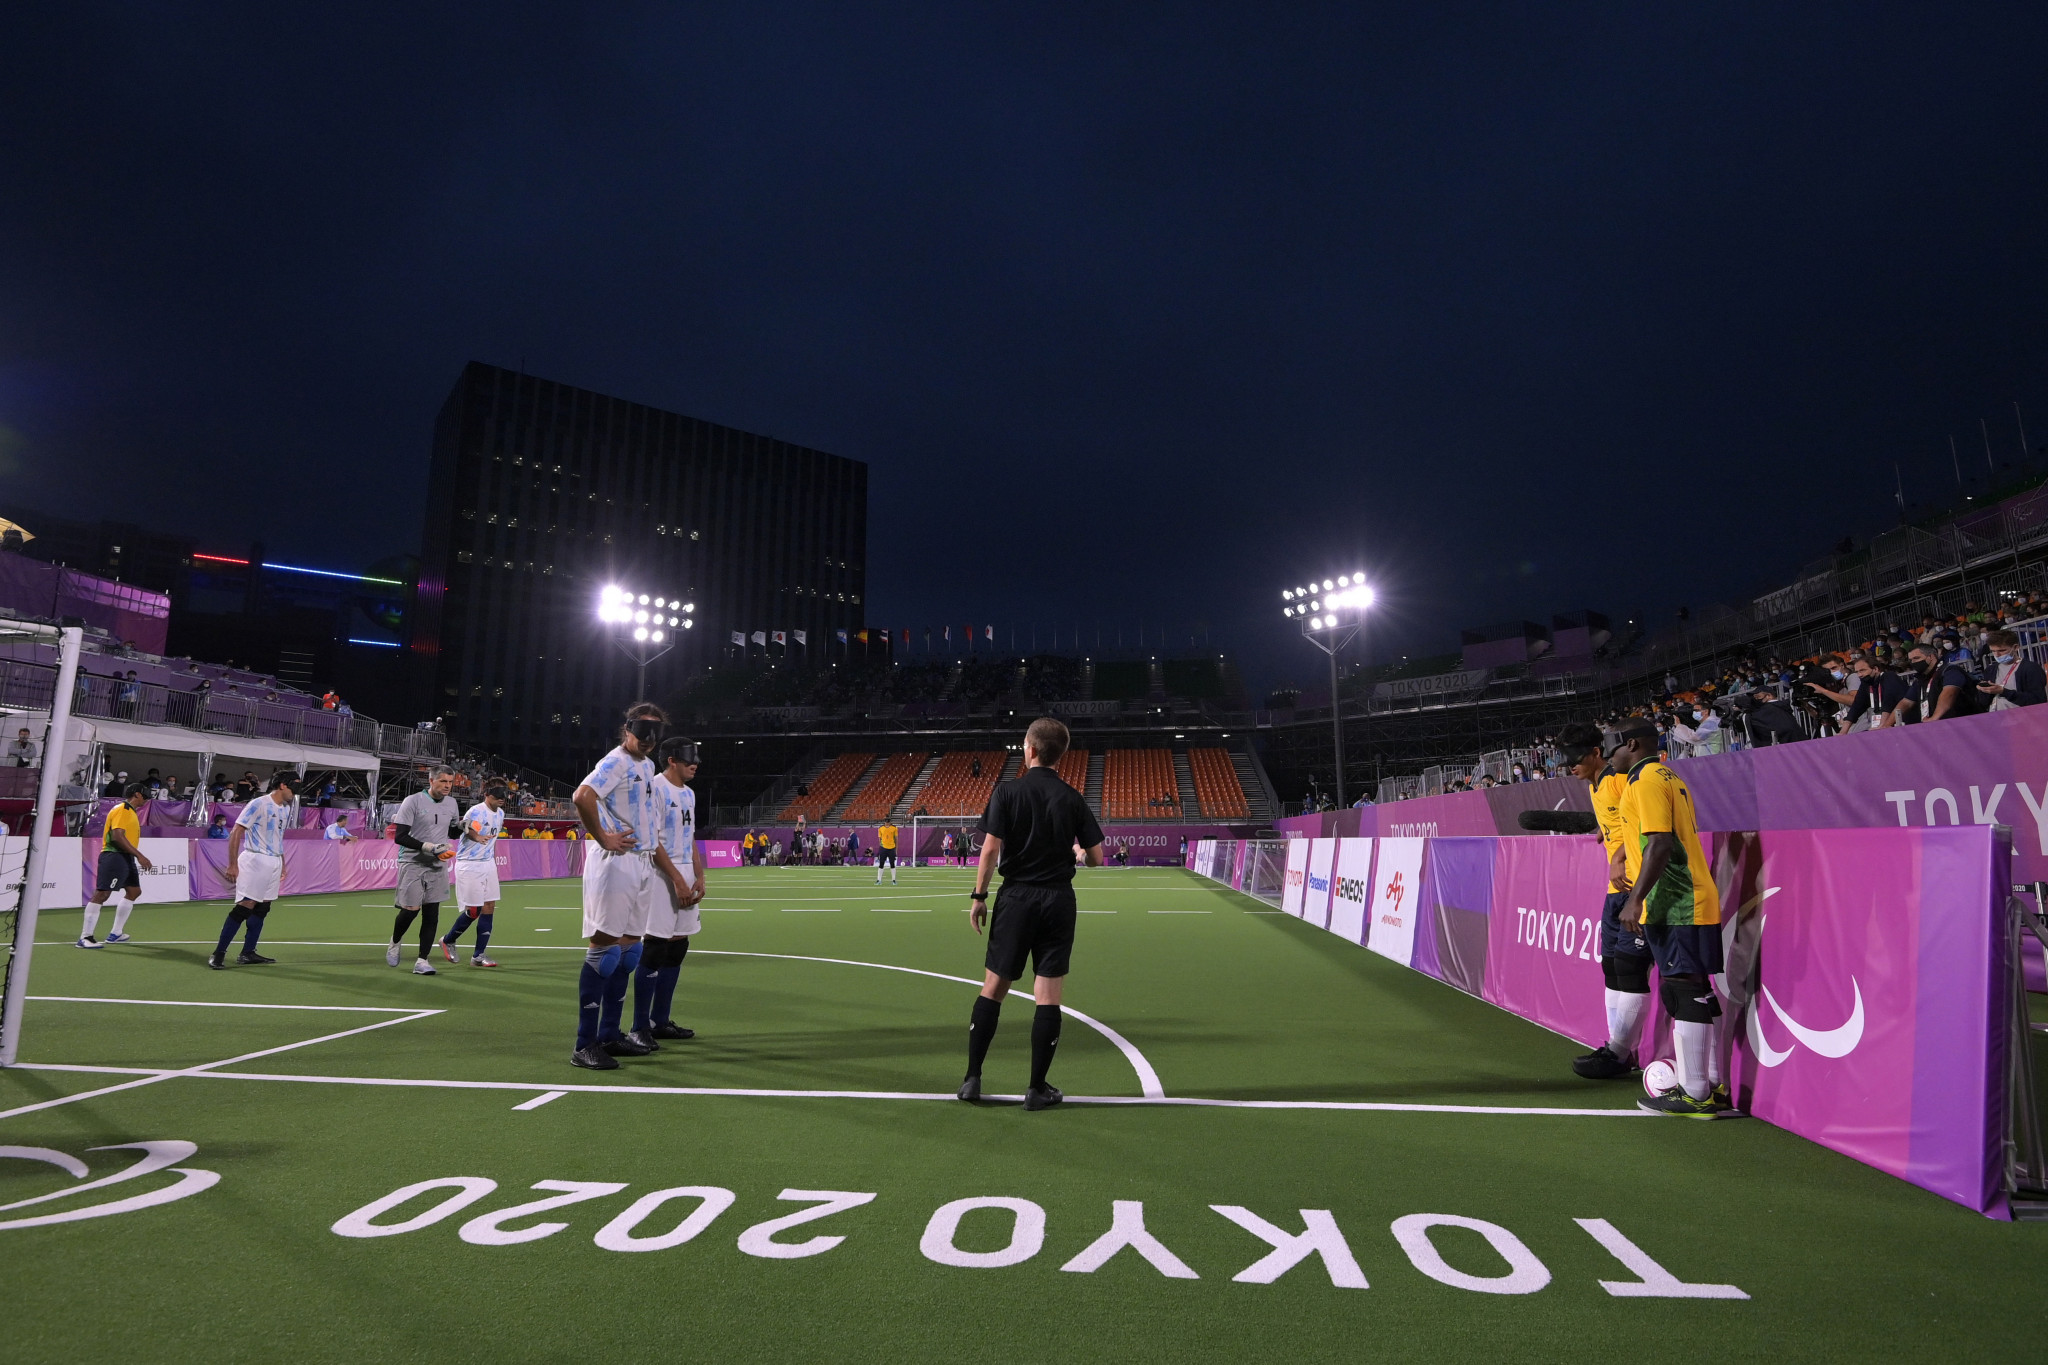 Blind football has been part of the Paralympics programme since Athens 2004, but Los Angeles 2028 is set to mark the first time the US has participated in the sport ©Getty Images